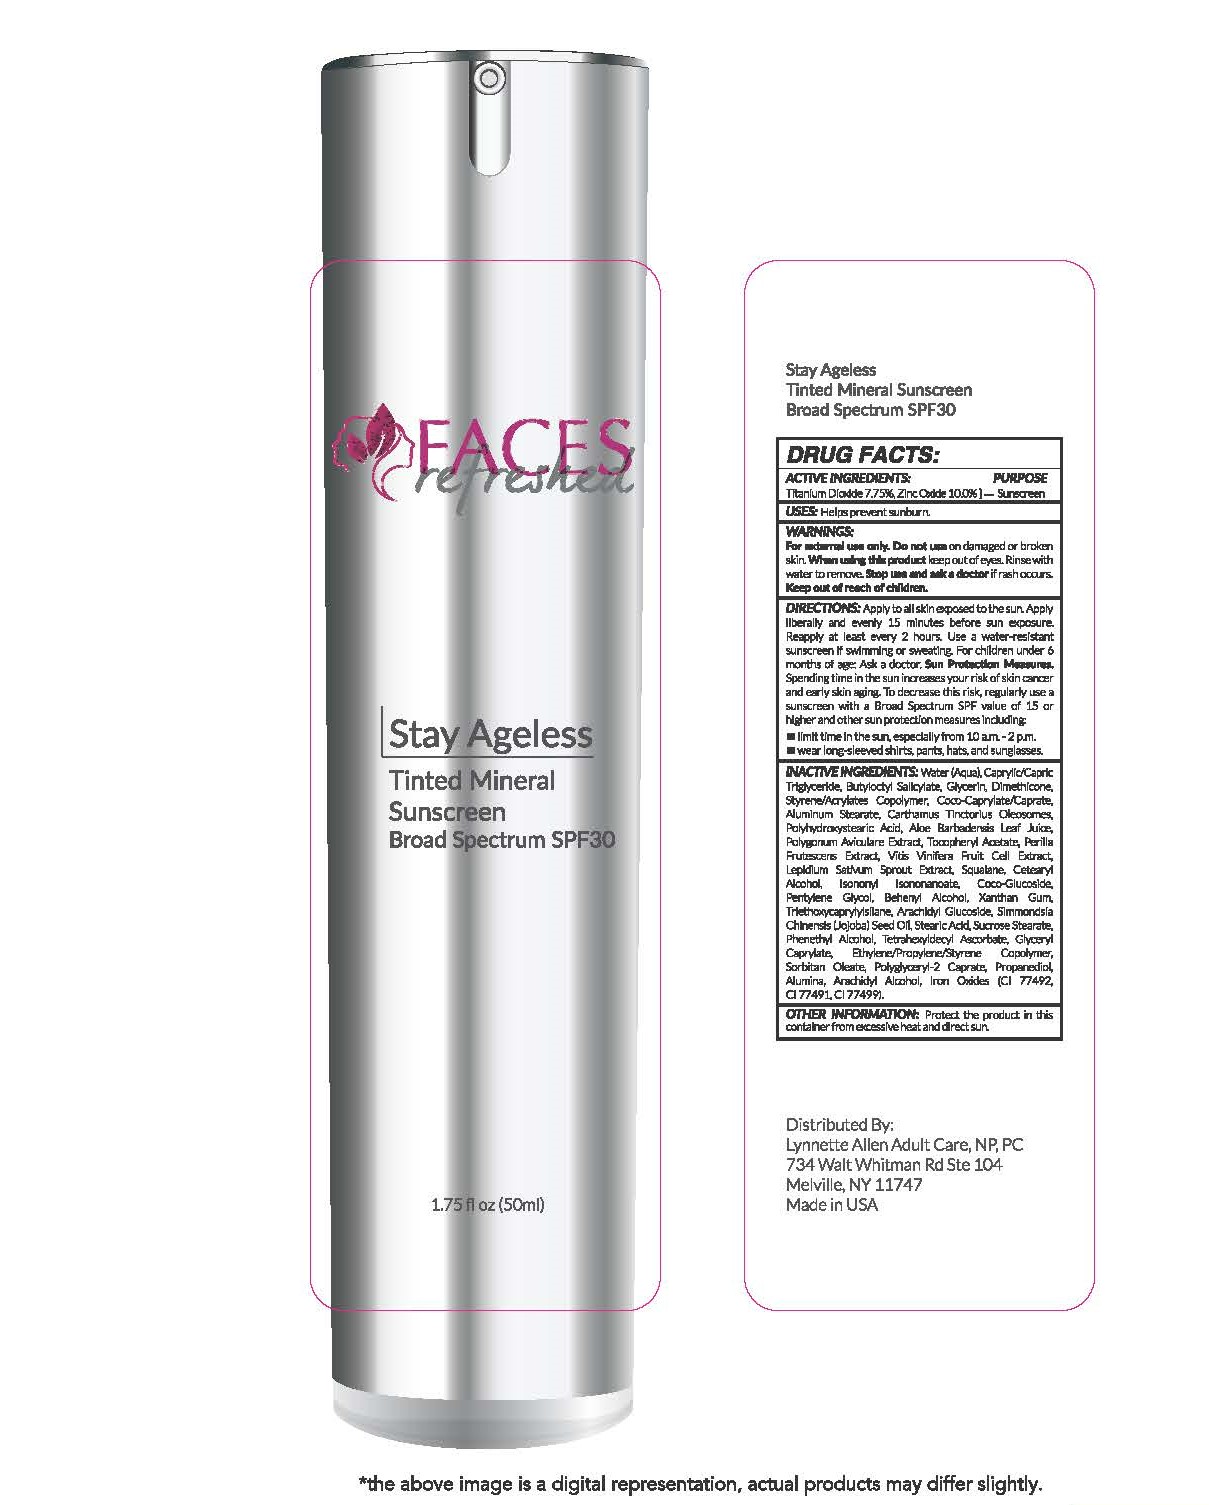 Faces Refreshed Stay Ageless Tinted Mineral Sunscreen Broad Spectrum SPF 30 1.75 fl oz (50ml)